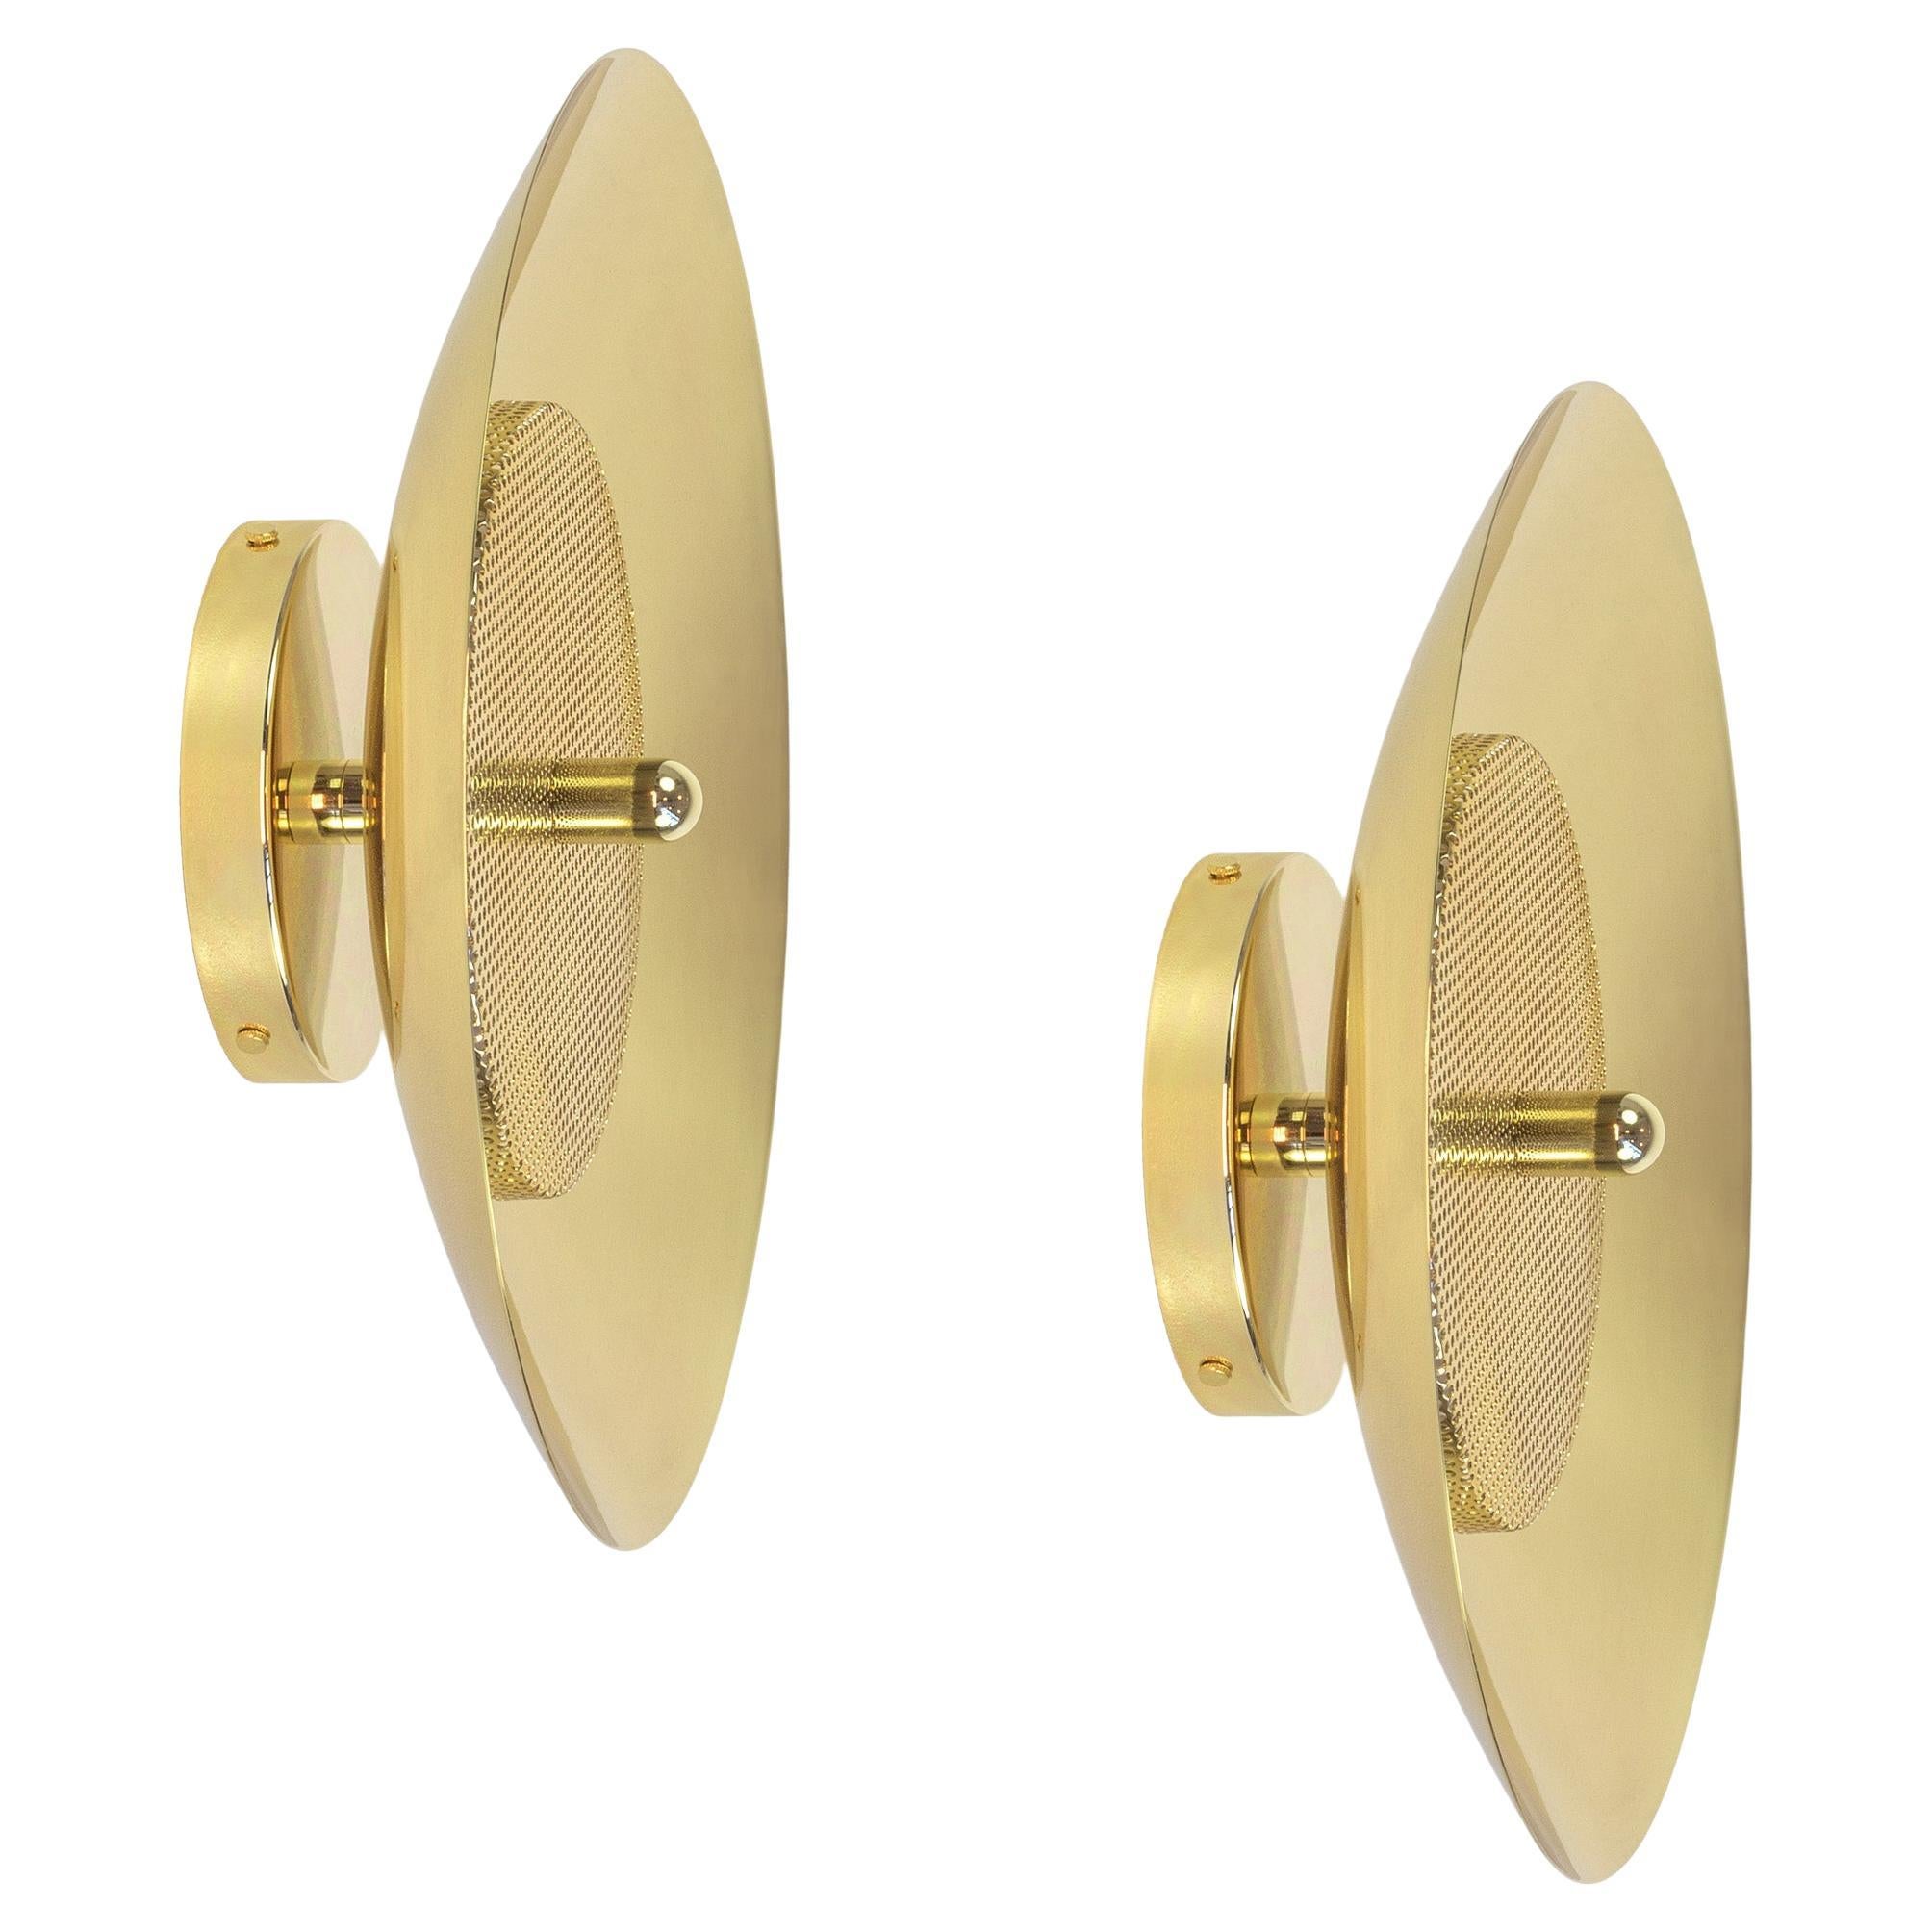 Pair of Signal Sconce from Souda, Brass, Made to Order